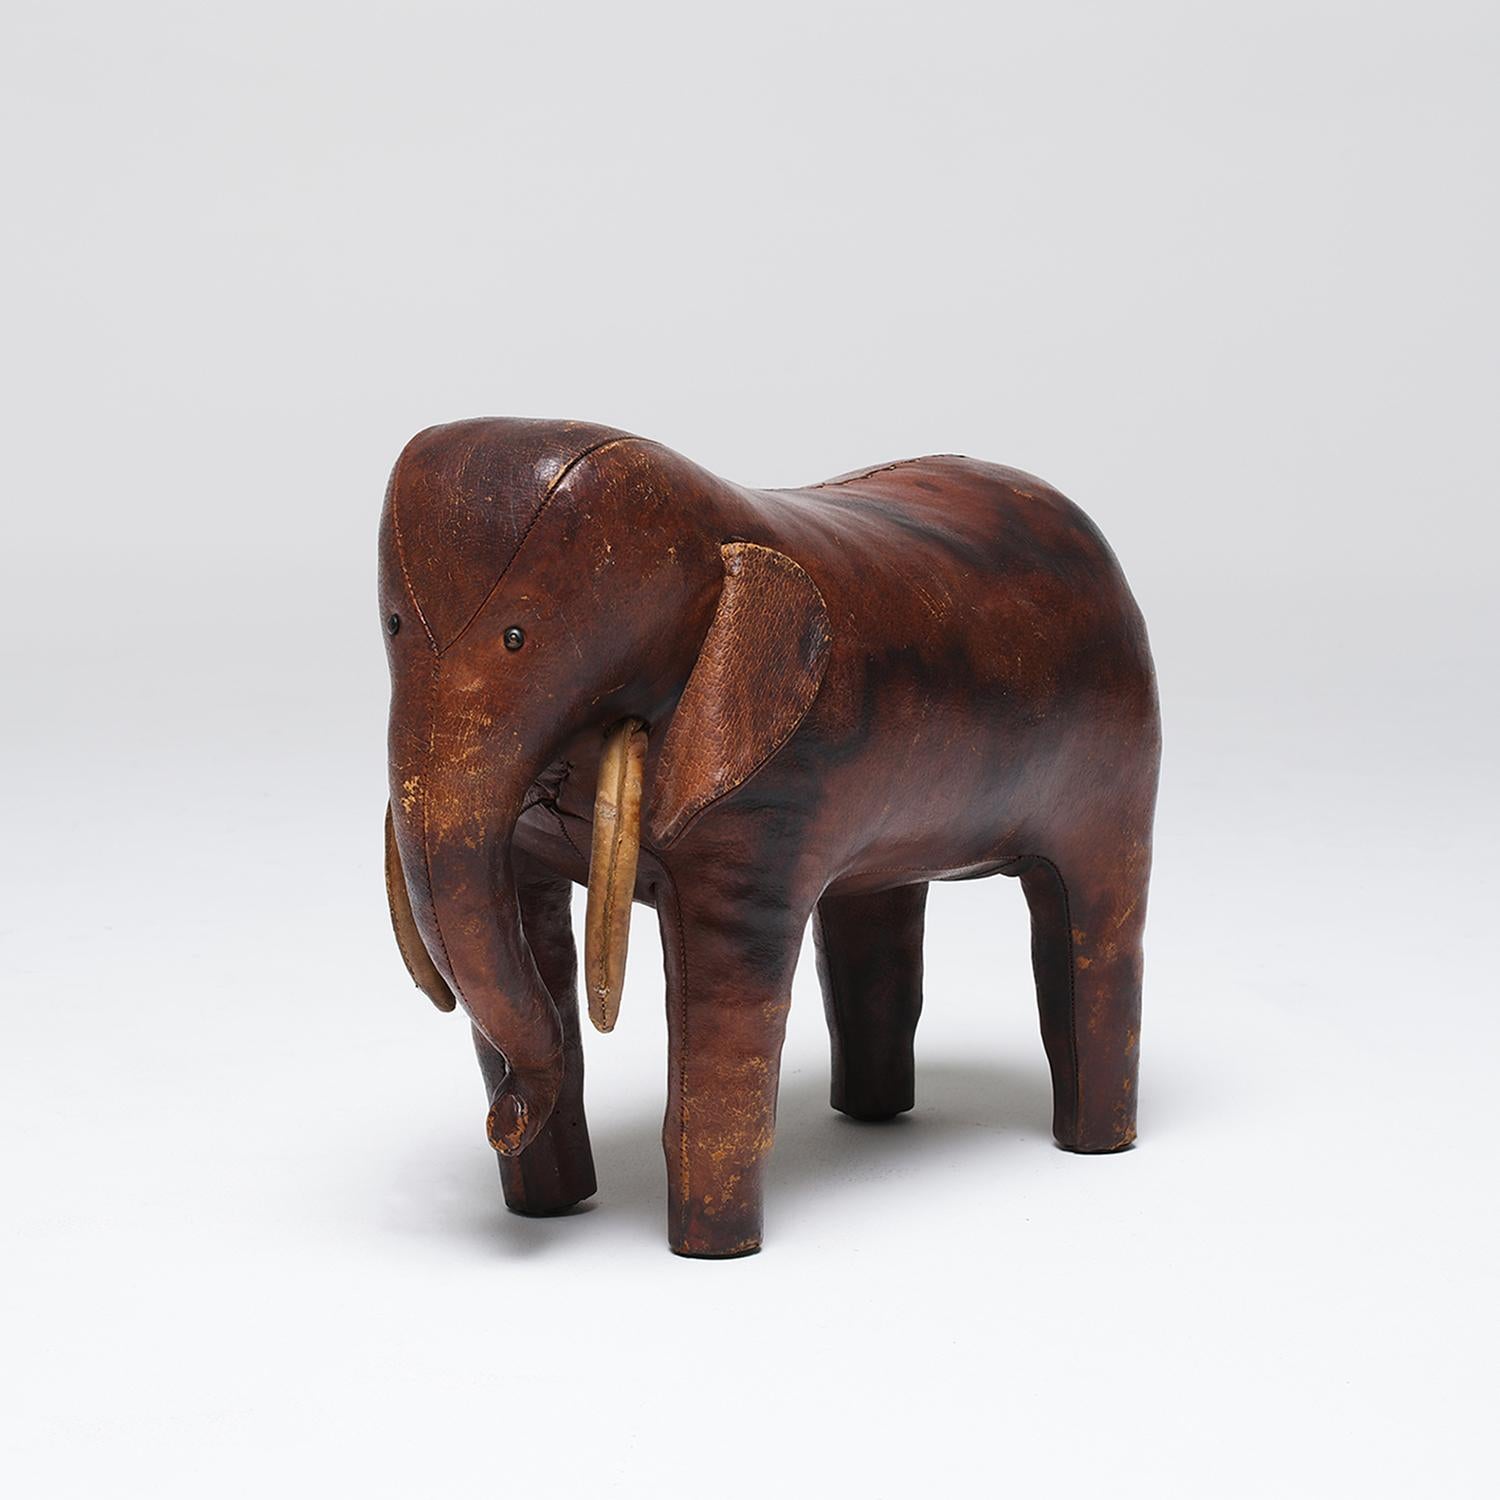 Hand-Crafted 20th Century English Vintage Elephant Footstool by Dimitri Omersa For Sale